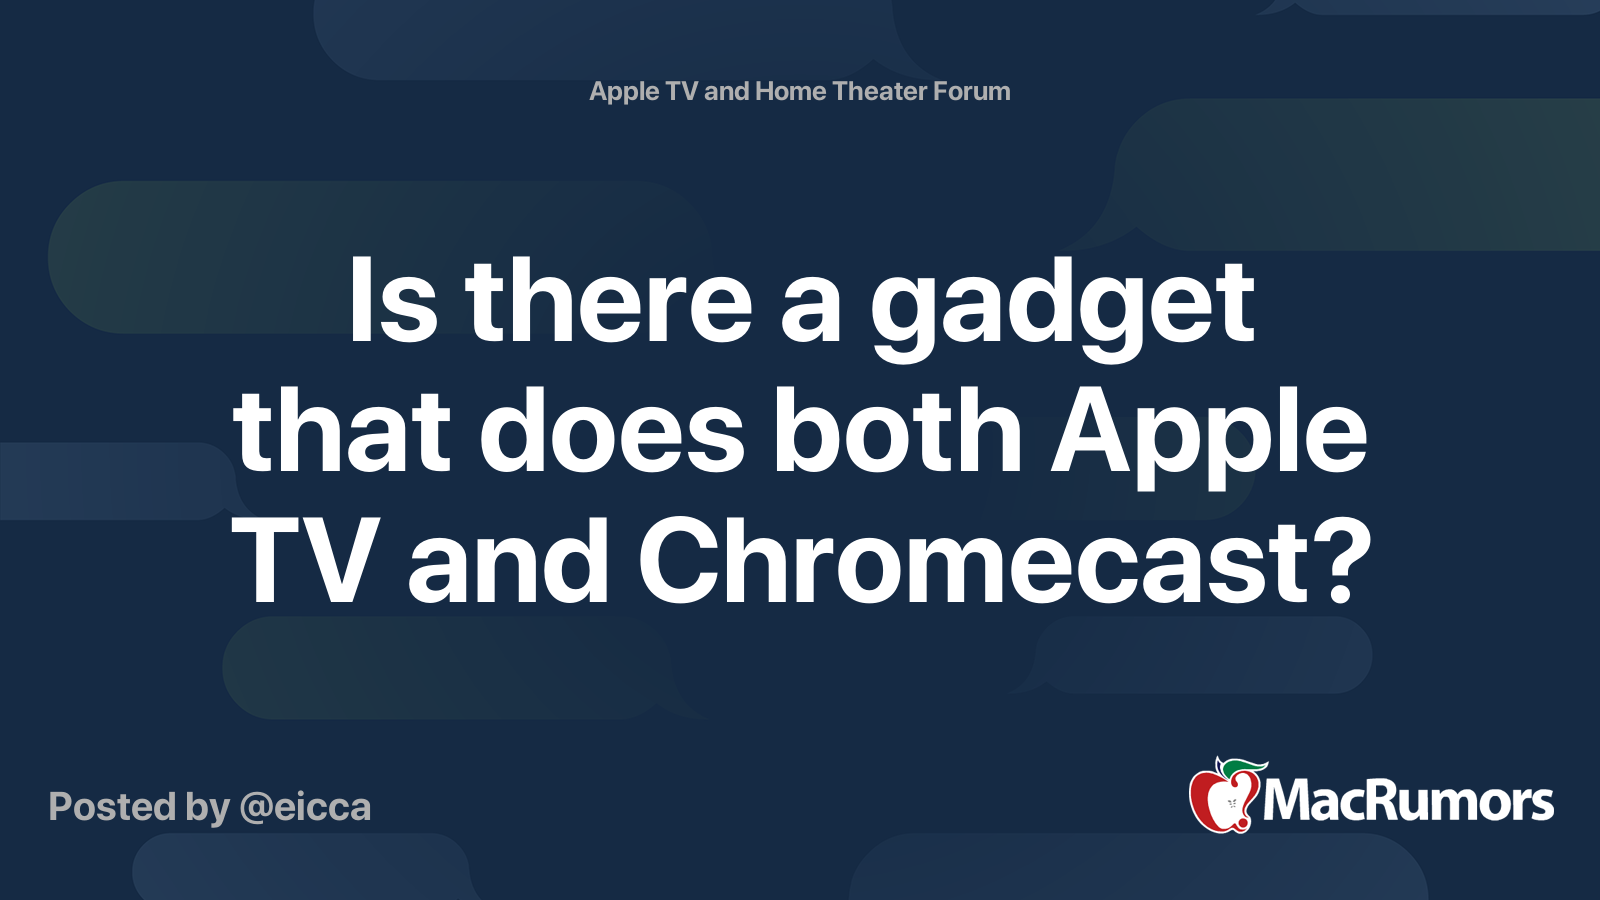 Is there a gadget that does both Apple TV and Chromecast? - MacRumors